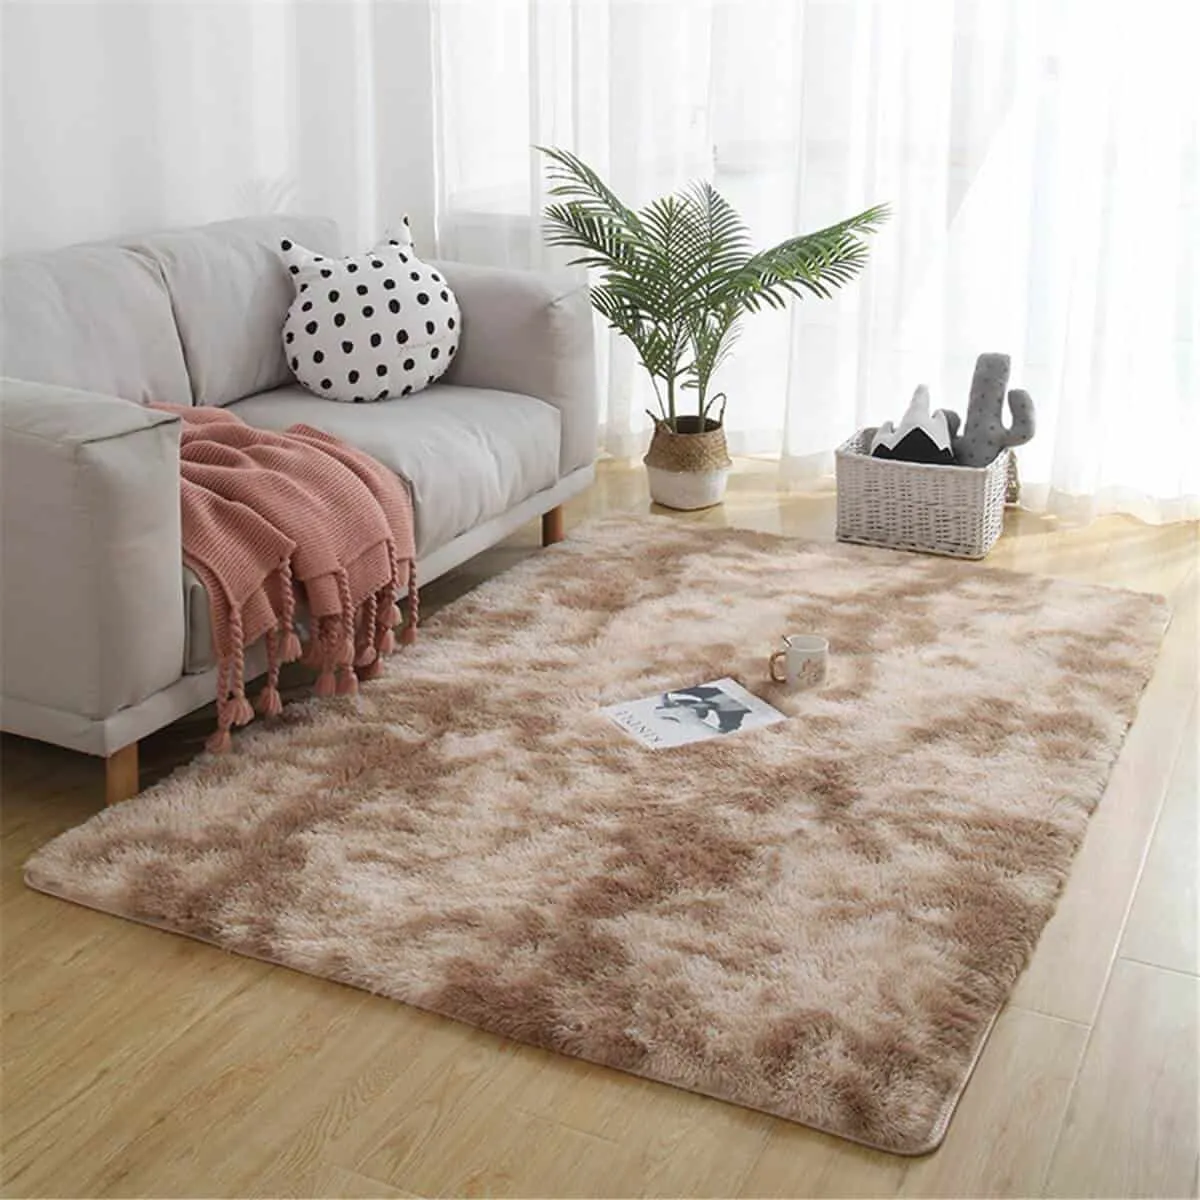 comfy cozy rug in brown earthy tone with a white sofa